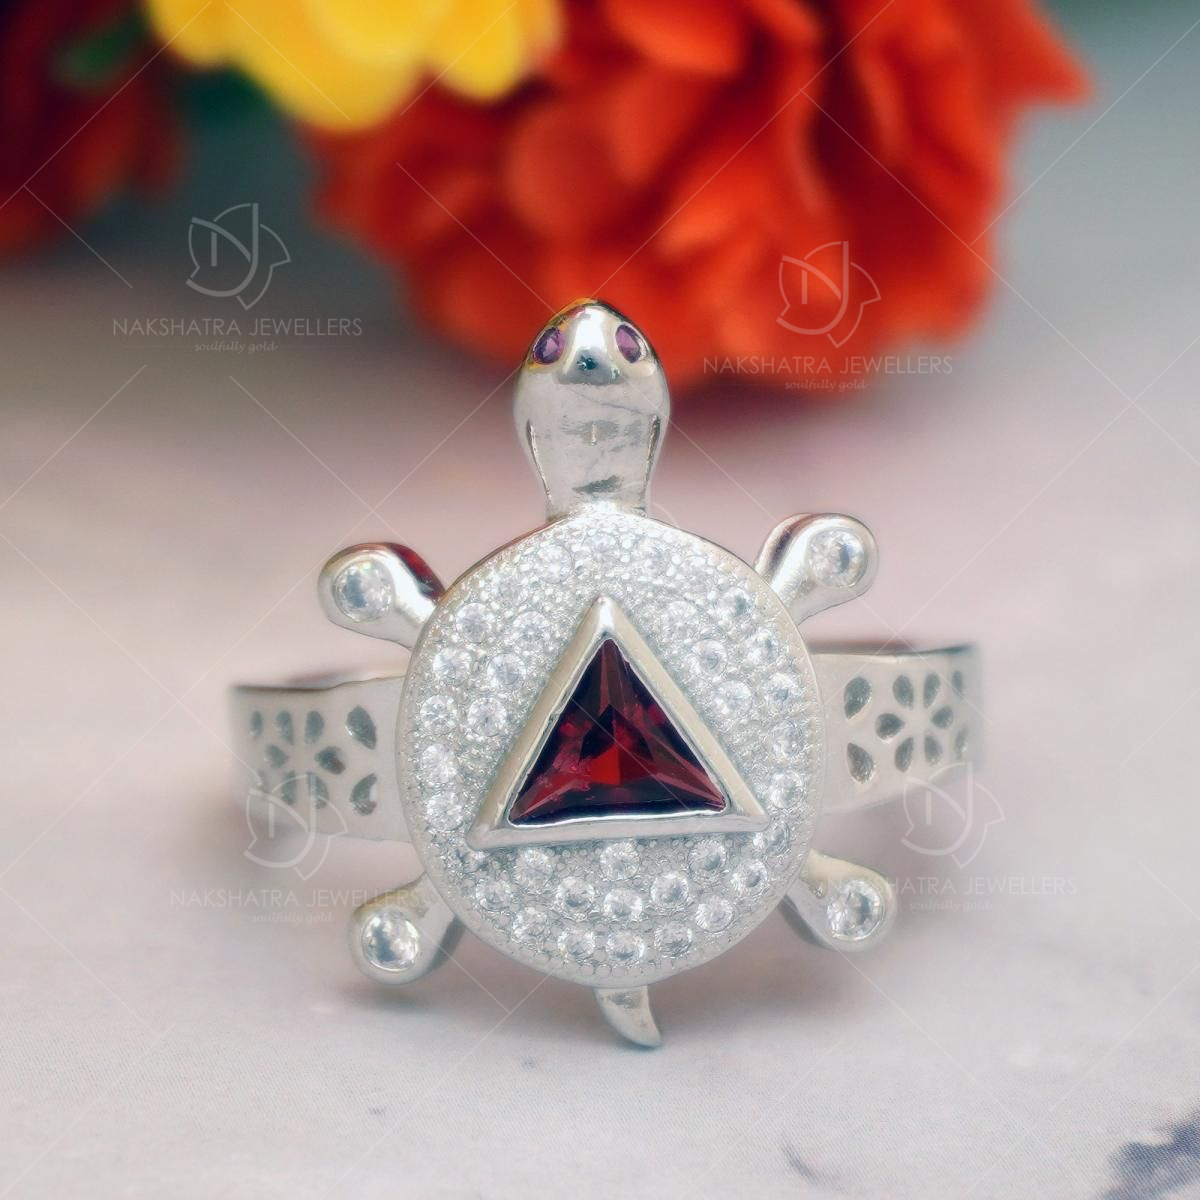 Tortoise Ring Made of Sterling Silver | Exotic India Art